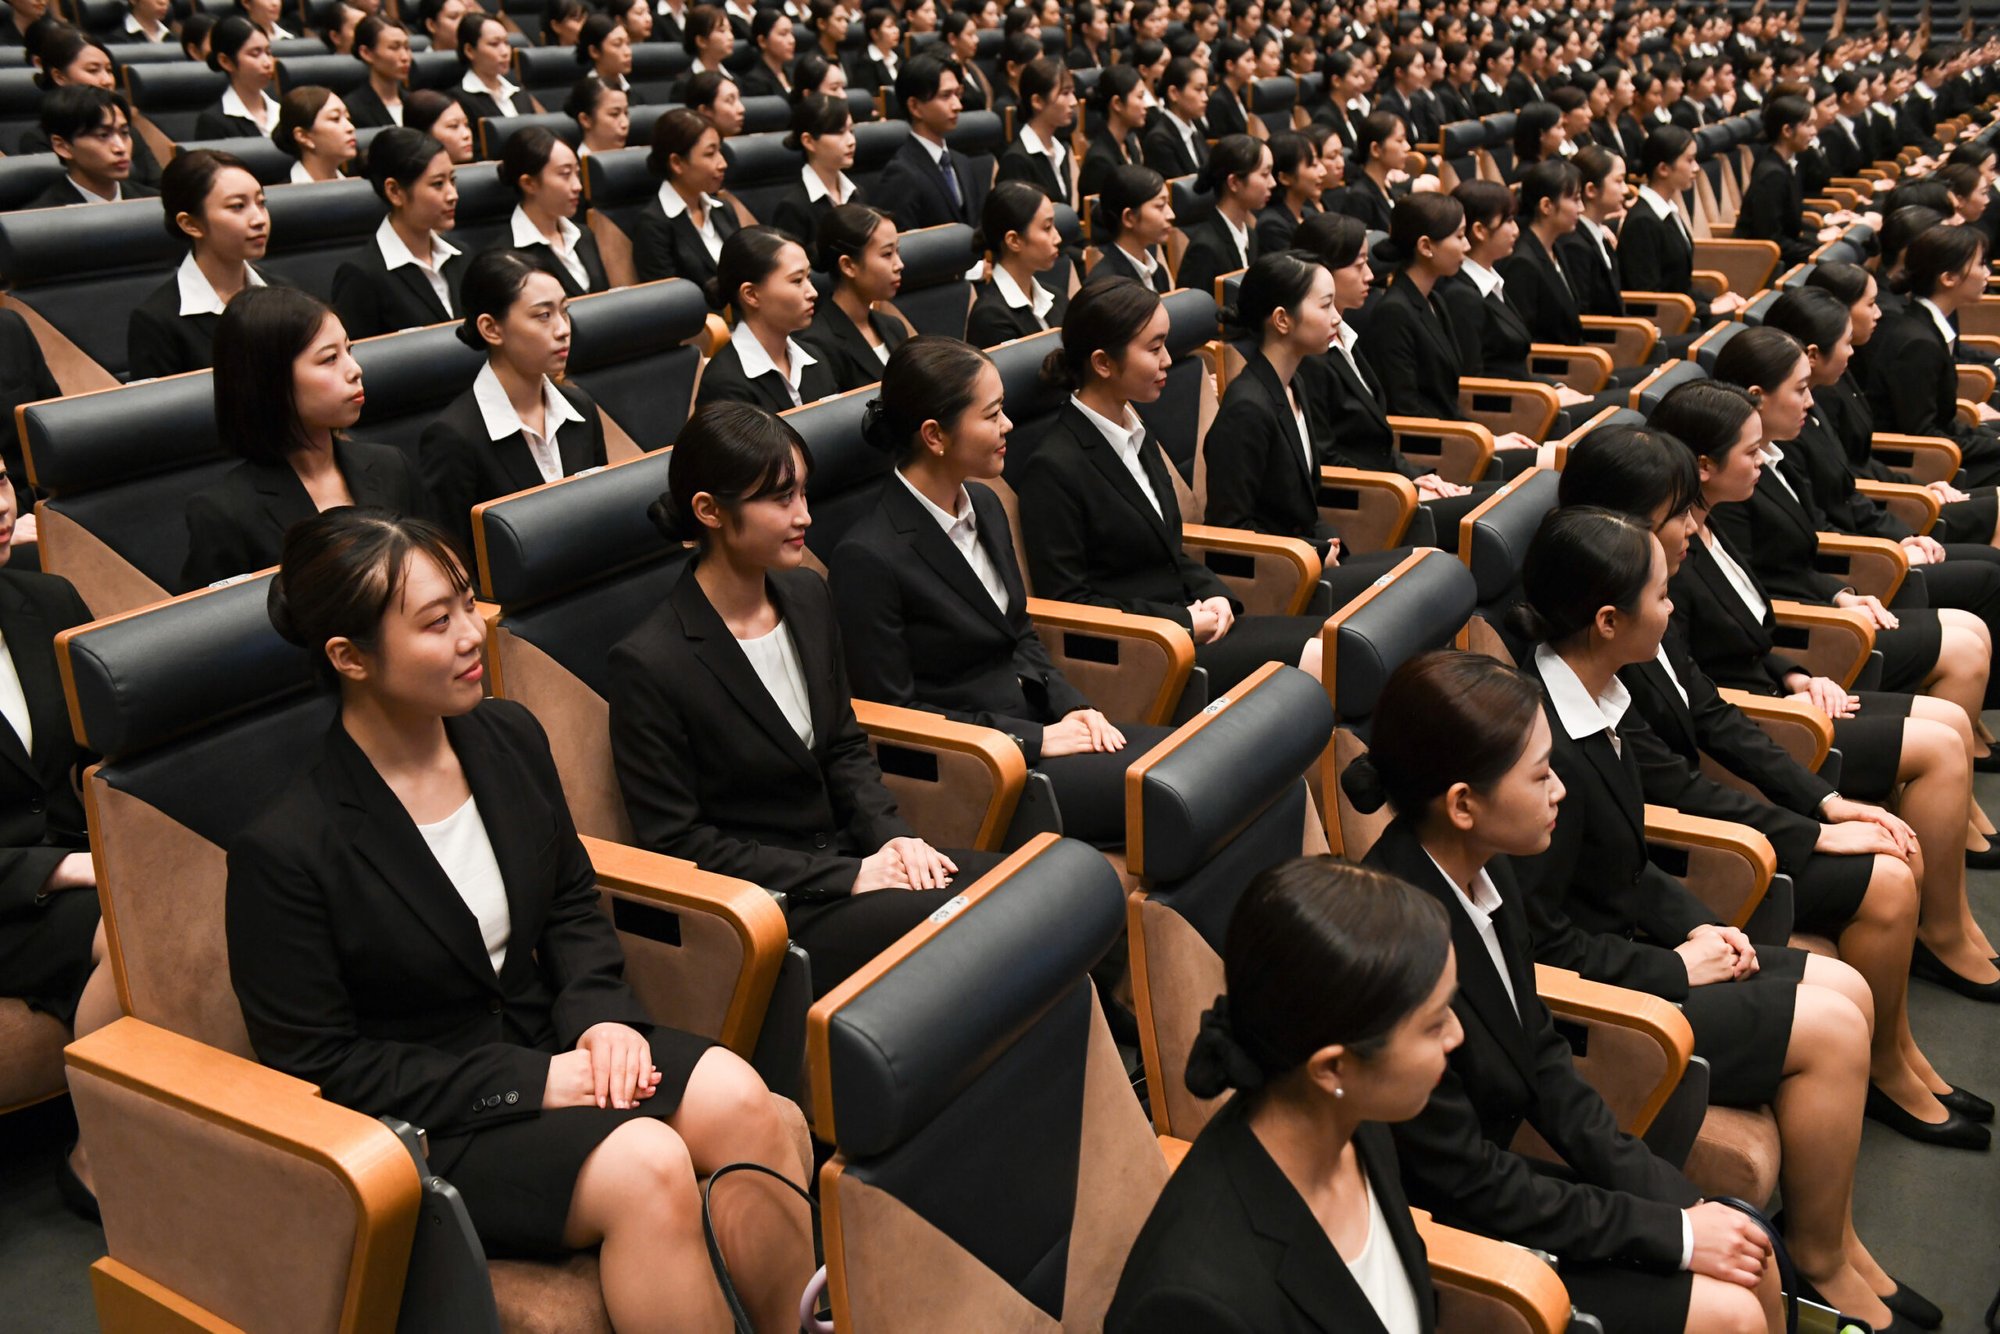 Newly hired flight attendants of All Nippon Airways (ANA) gather for their induction ceremony in Tokyo.         